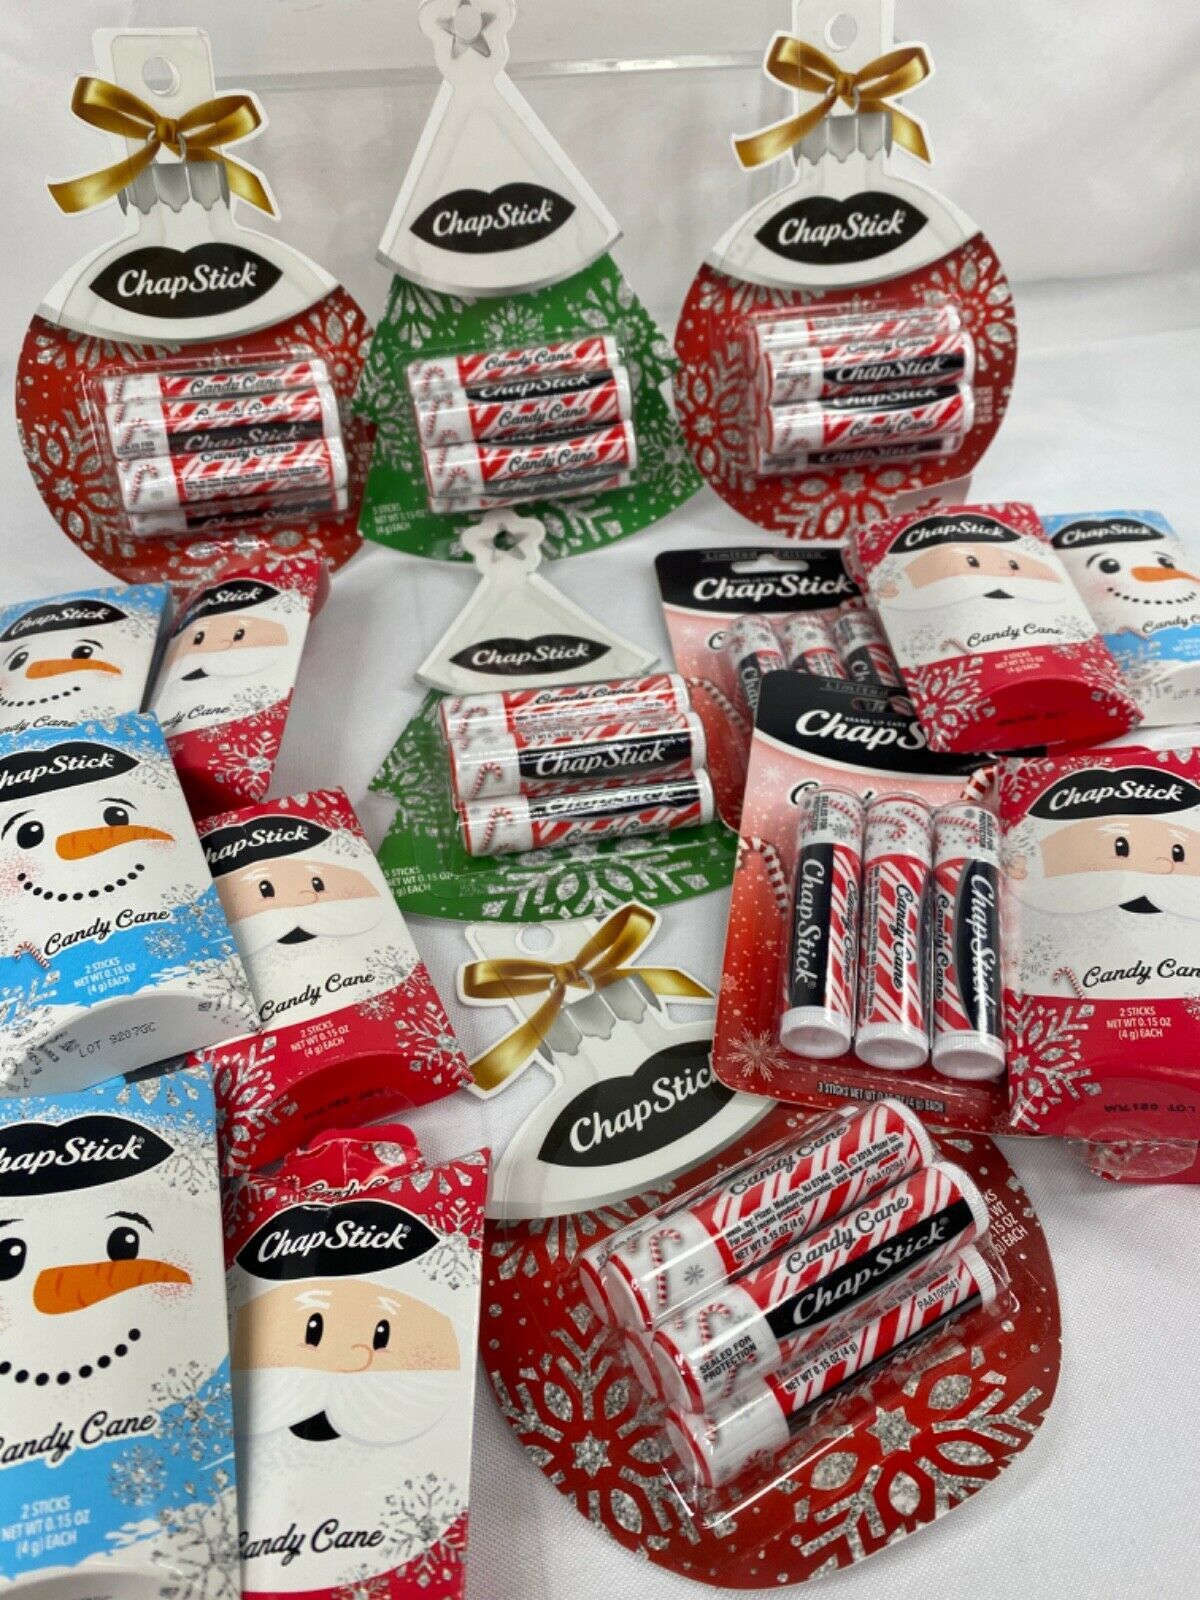 ChapStick Holiday Candy Cane Gift Set YOU CHOOSE Buy More Save +Combine Shipping - $2.99 - $4.99